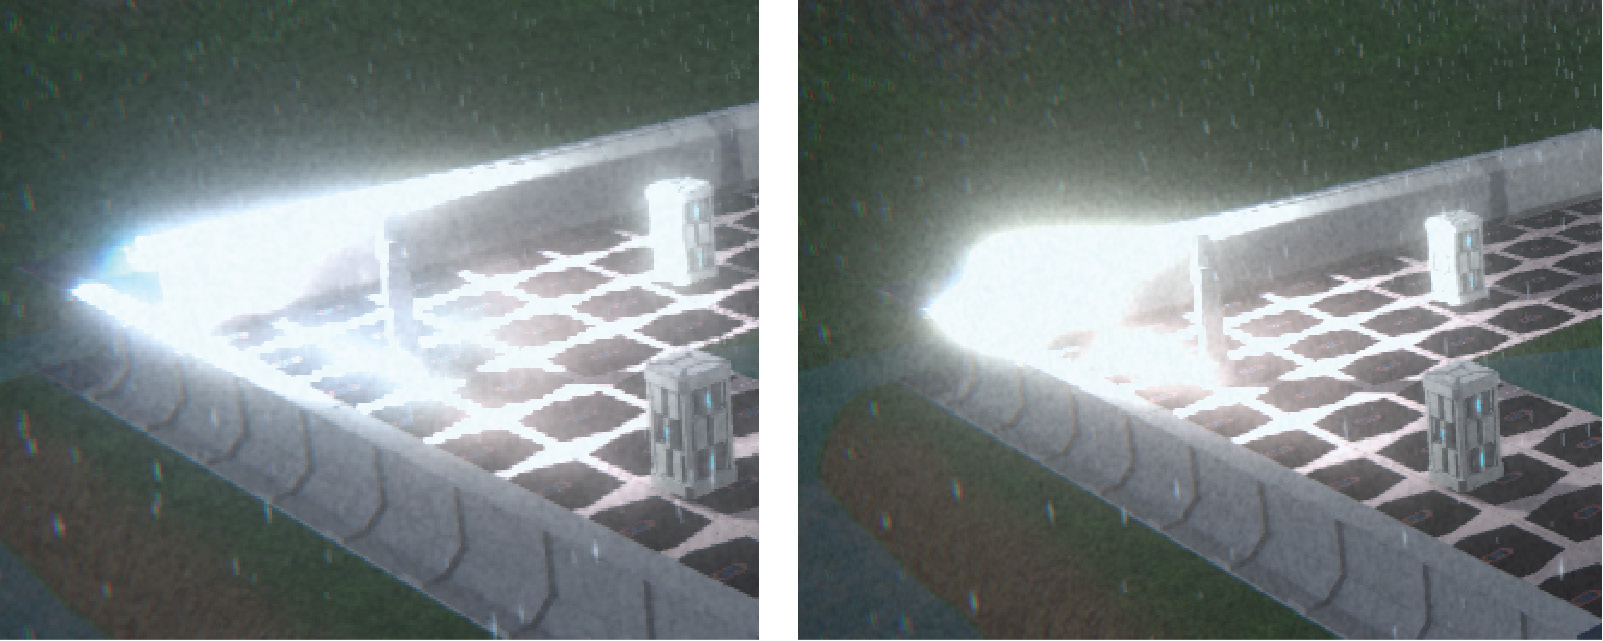 Figure 9.15 – Bloom in an LDR scene (left) and Bloom in an HDR scene (right). 
